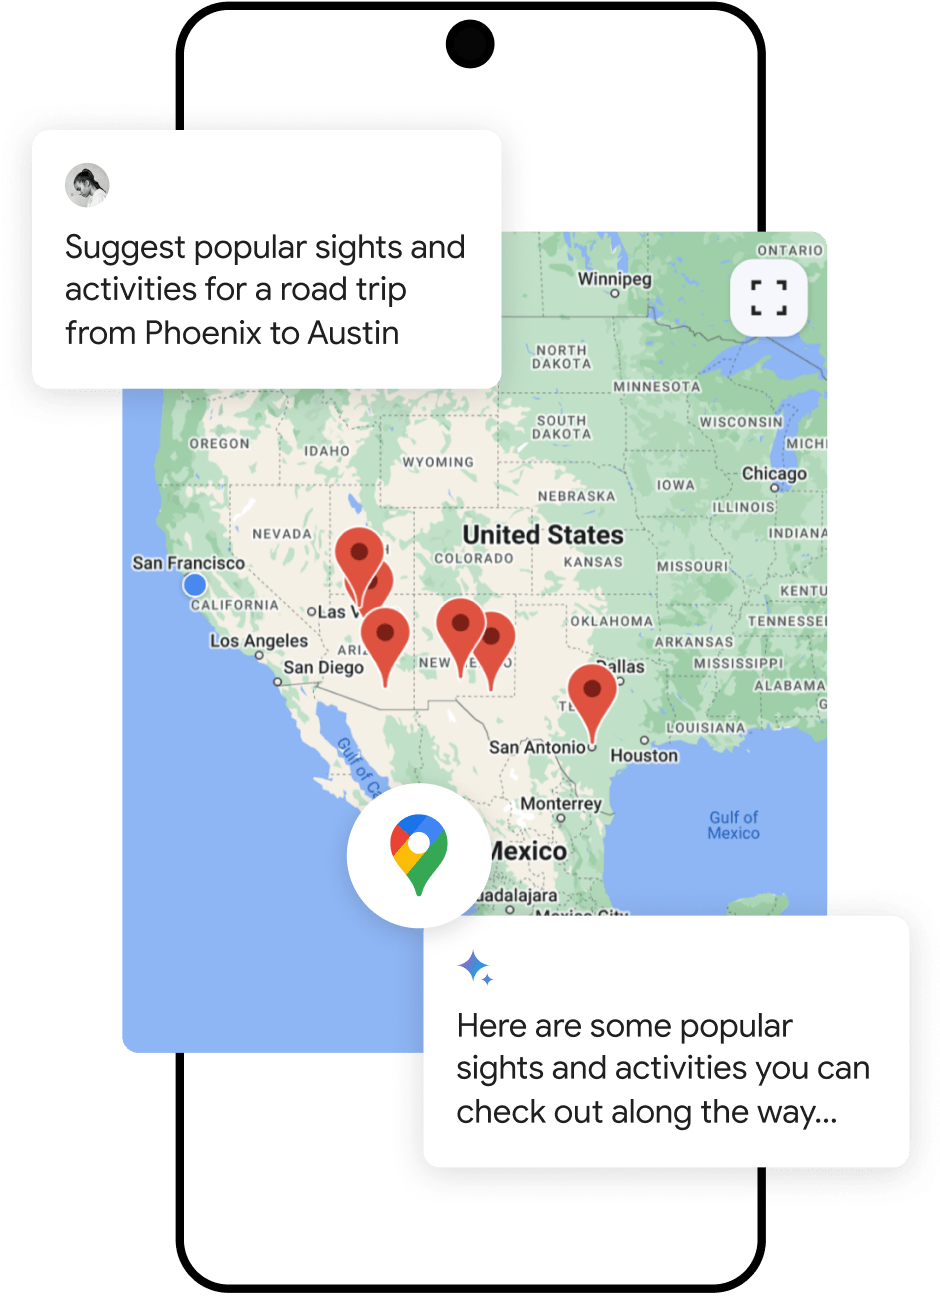 Slide for suggesting popular sights and activities for a road trip from Phoenix to Austin